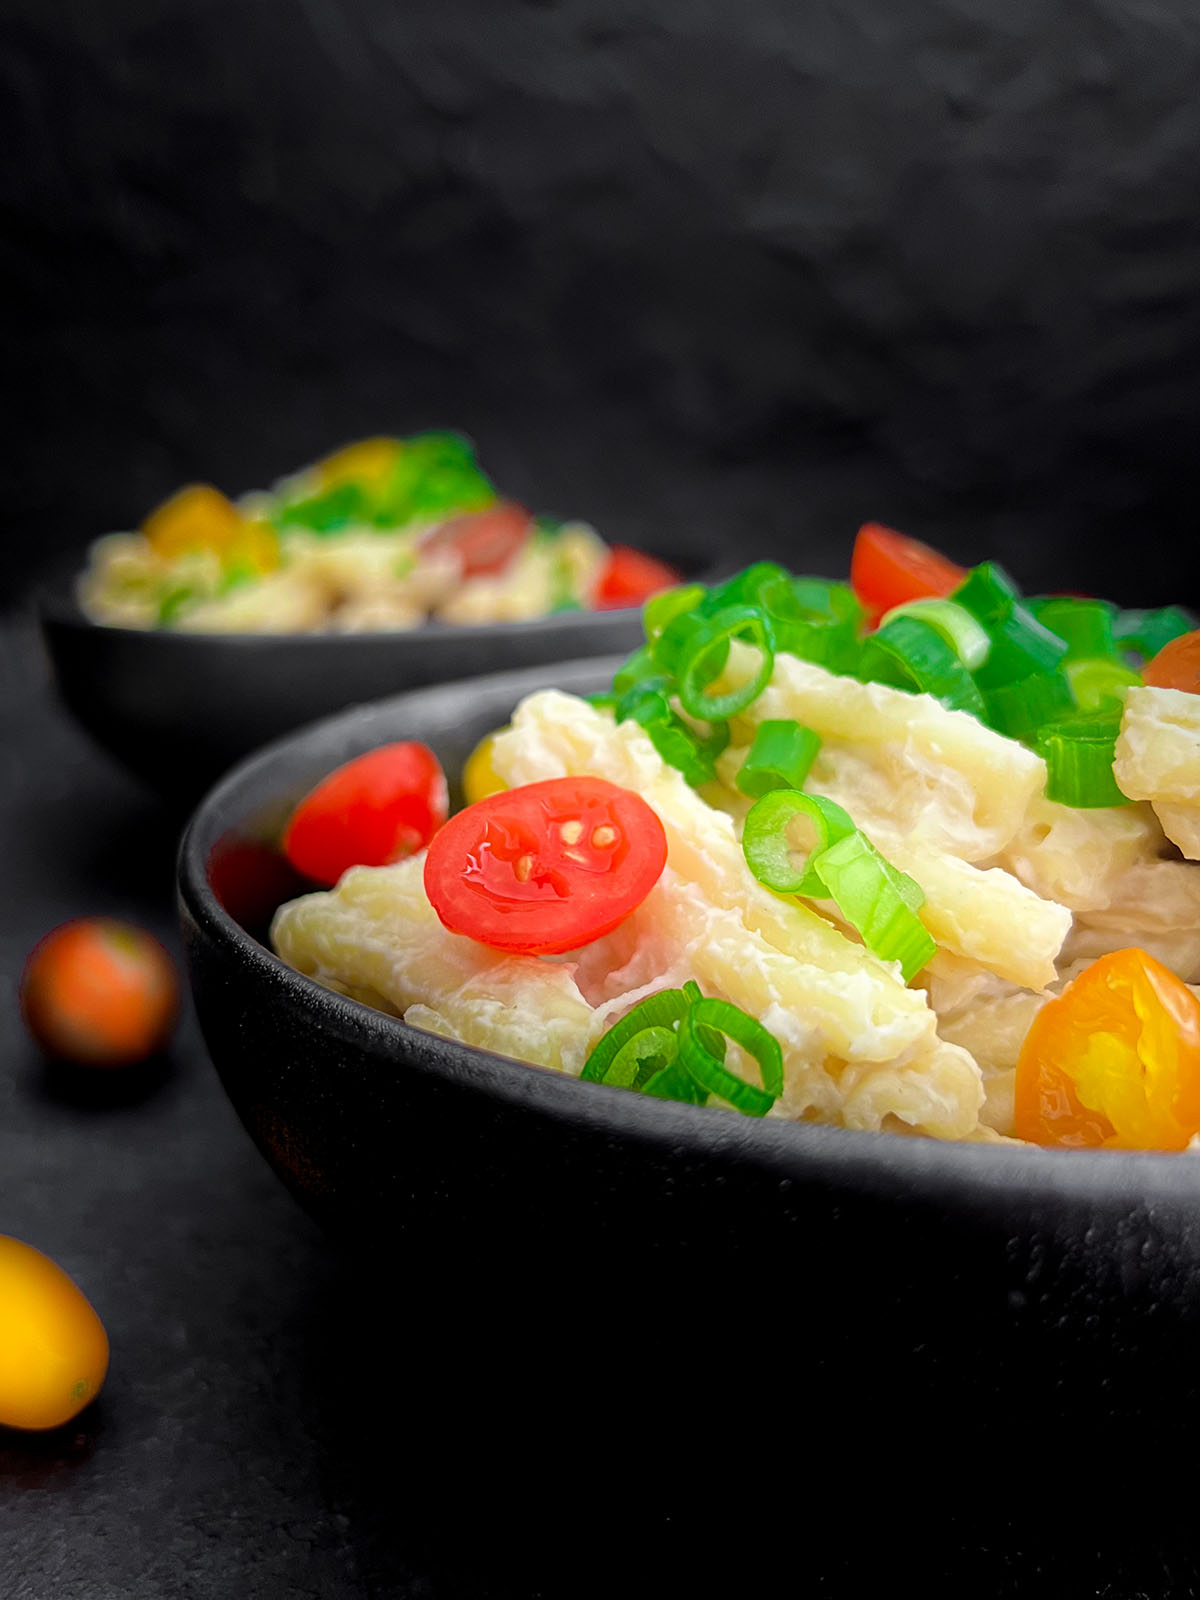 Vegan, gluten-free Cauliflower Alfredo pasta served in bowls garnished with spring onions and cherry tomatoes.